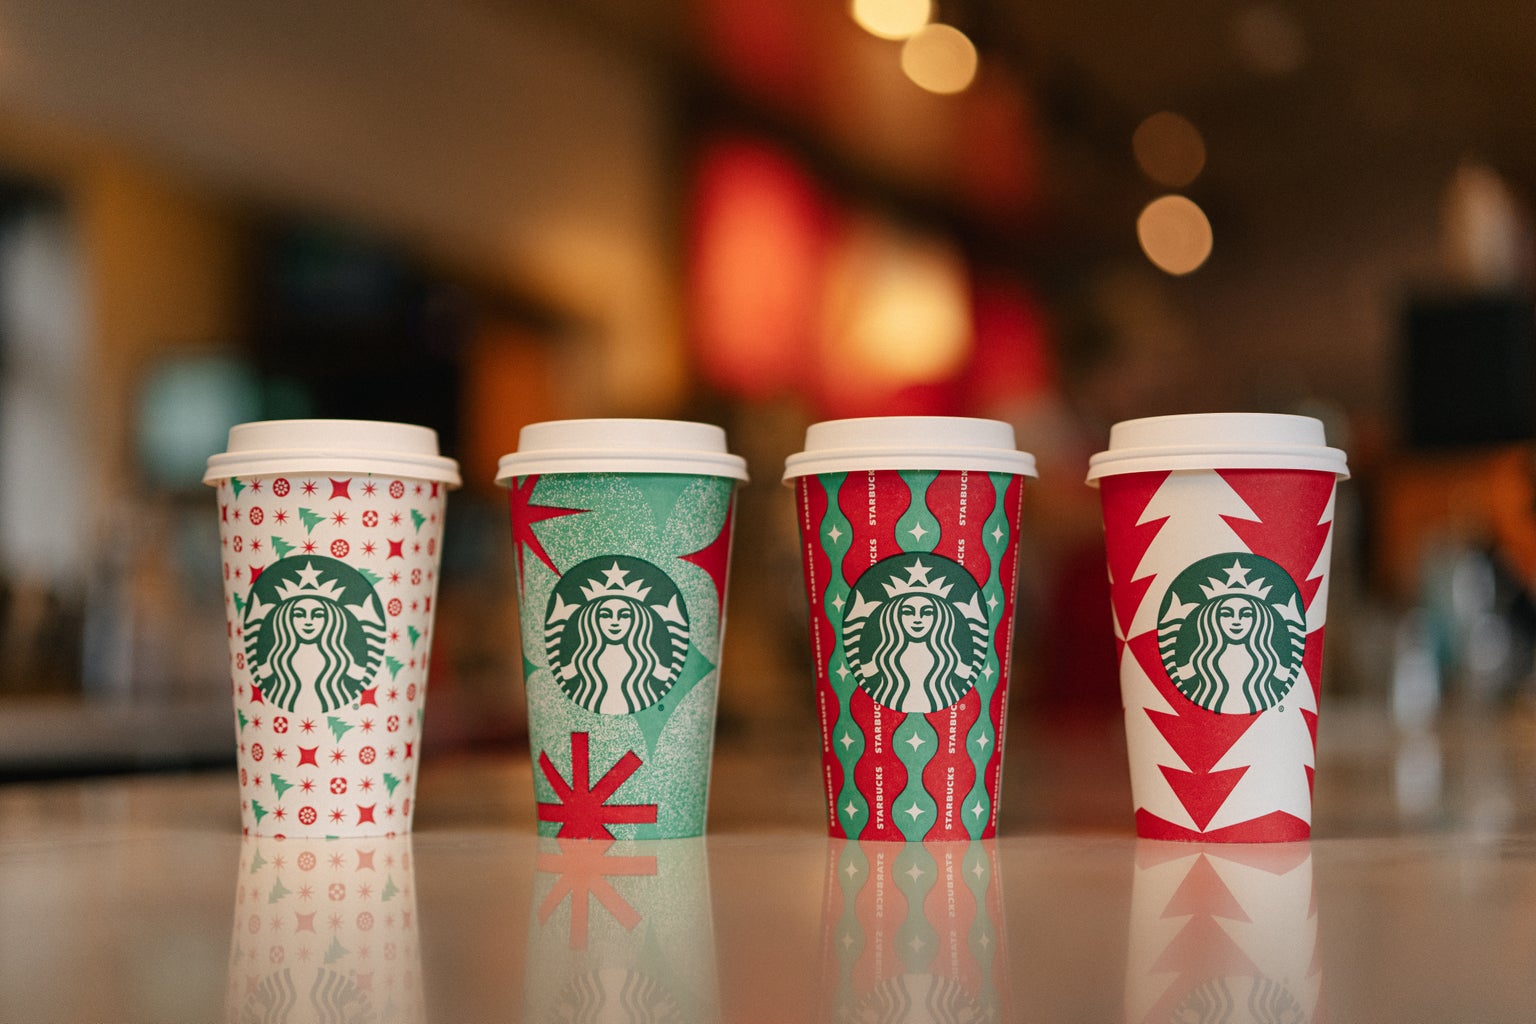 Starbucks Holiday 1?width=1024&height=1024&fit=cover&auto=webp